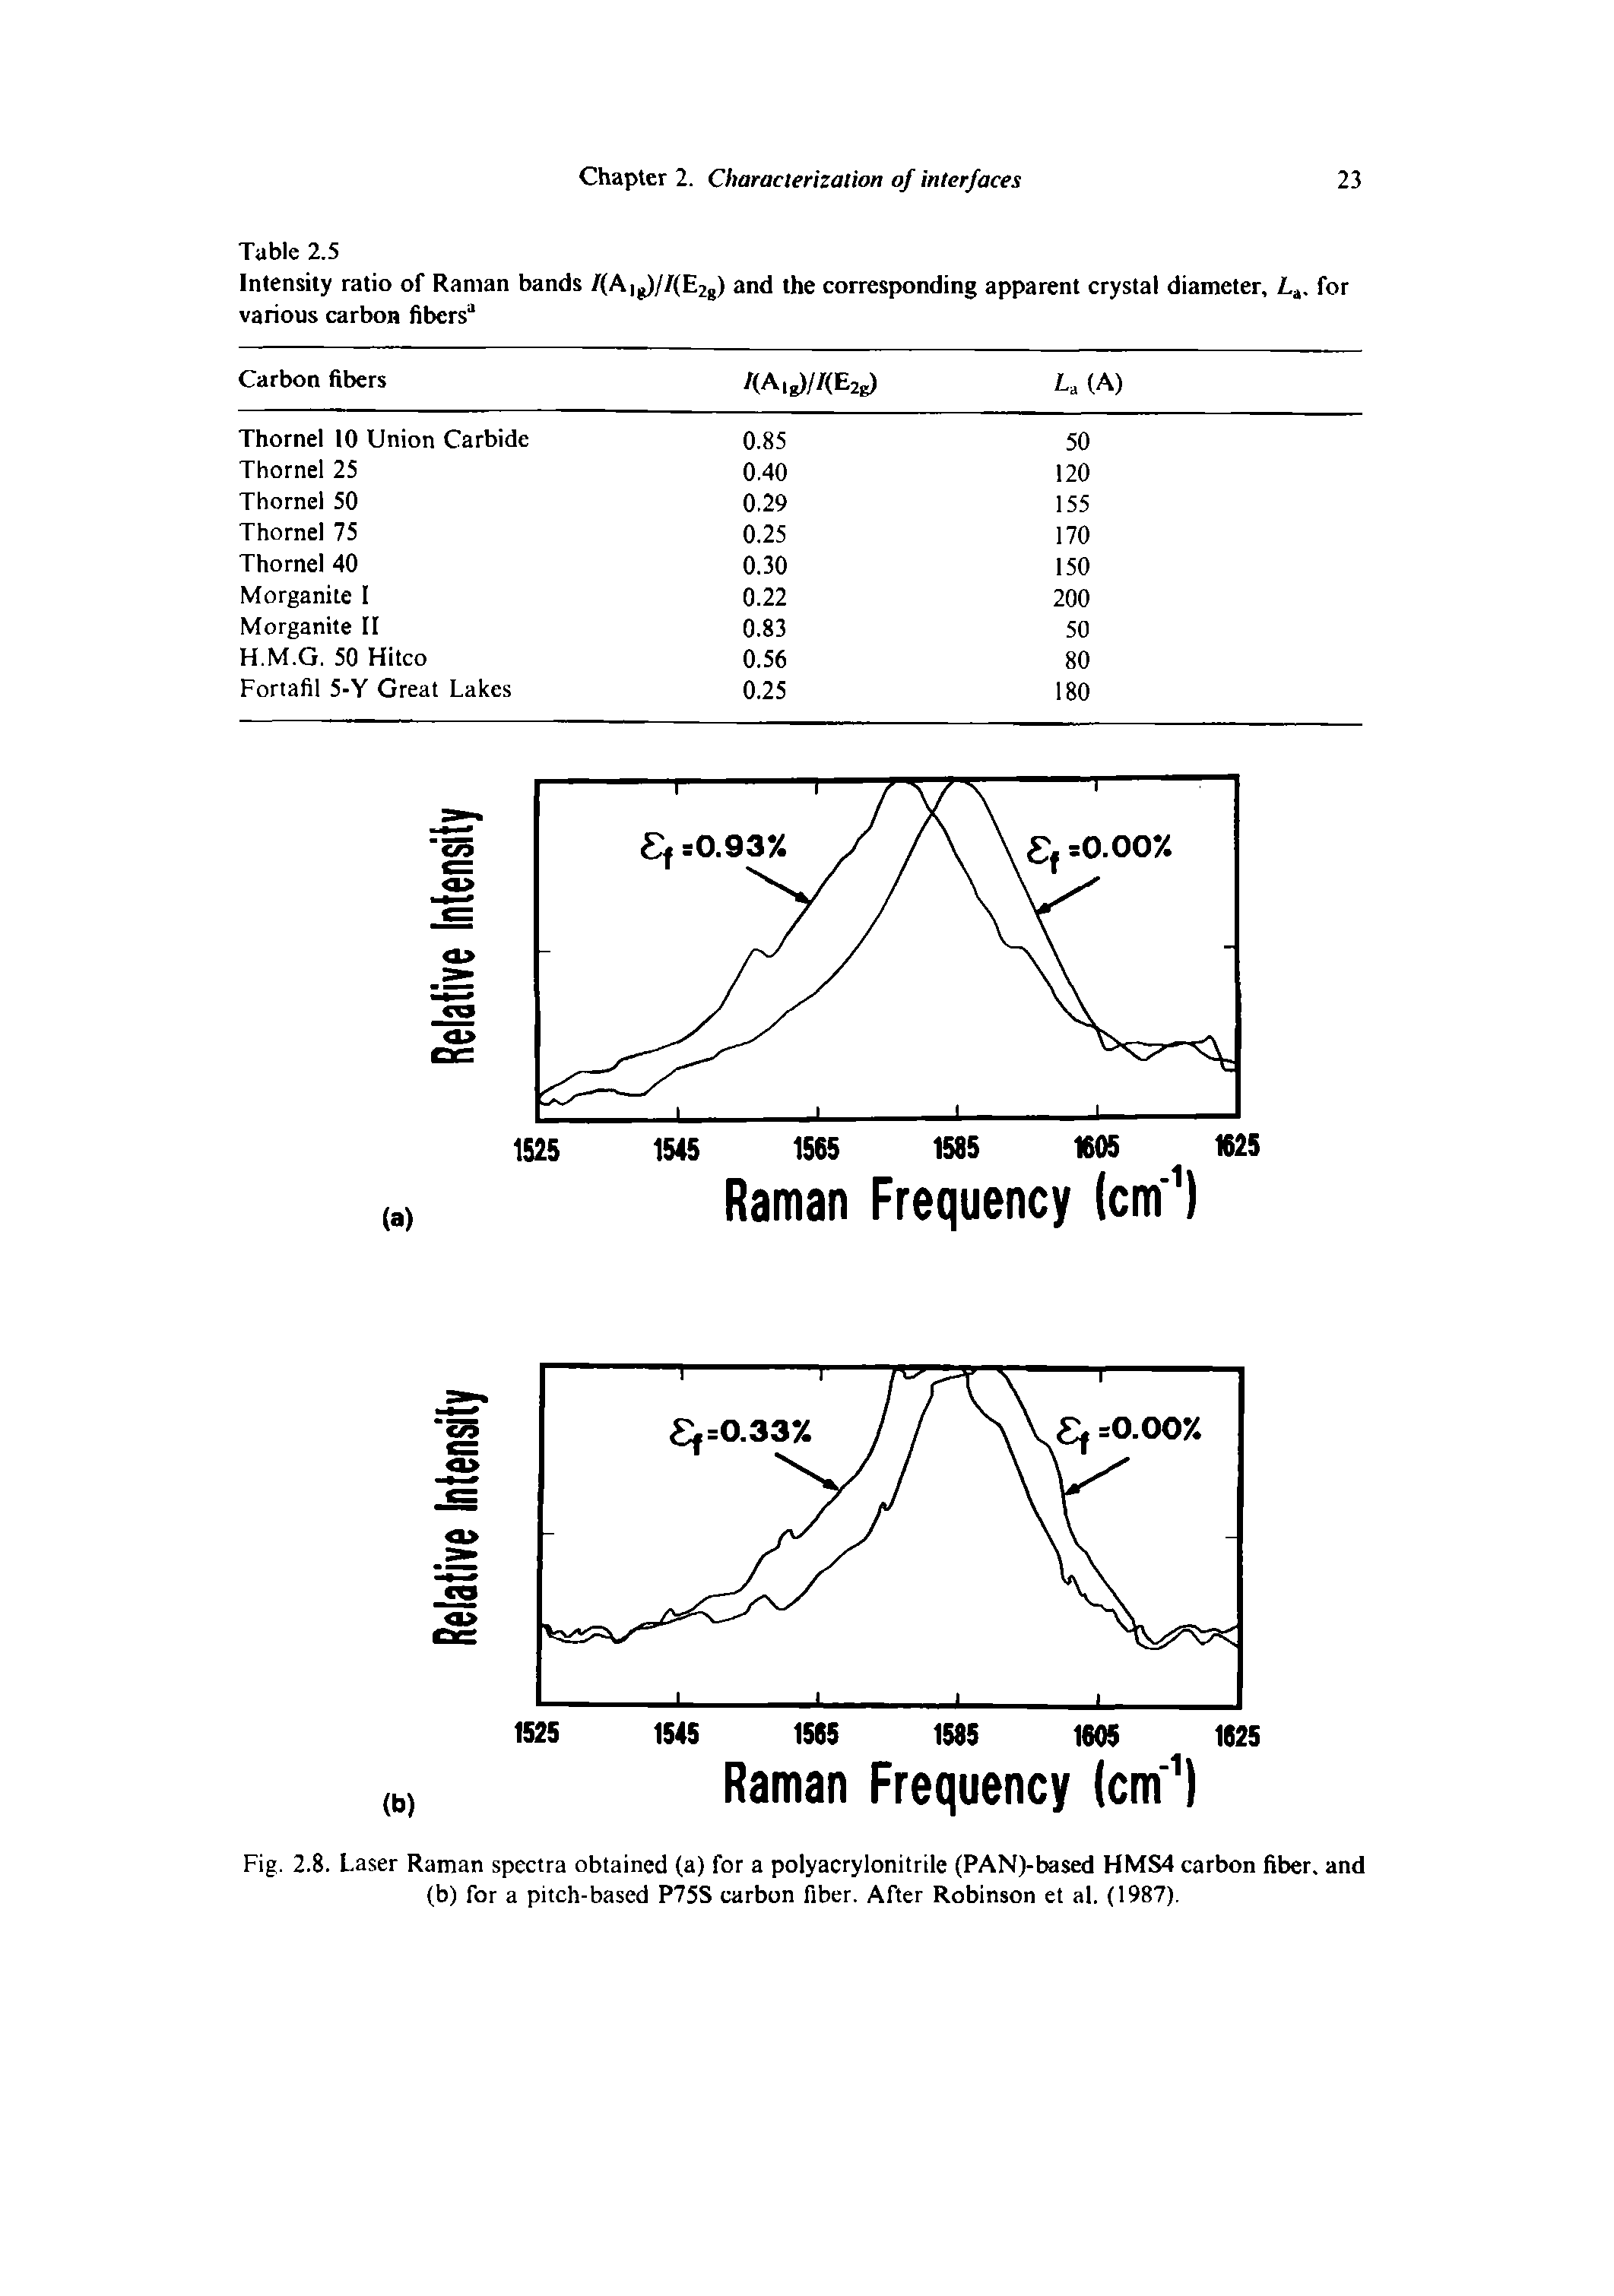 Fig. 2.8. Laser Raman spectra obtained (a) for a polyacrylonitrile (PAN)-based HMS4 carbon fiber, and (b) for a pitch-based P75S carbon fiber. After Robinson et al. (1987).